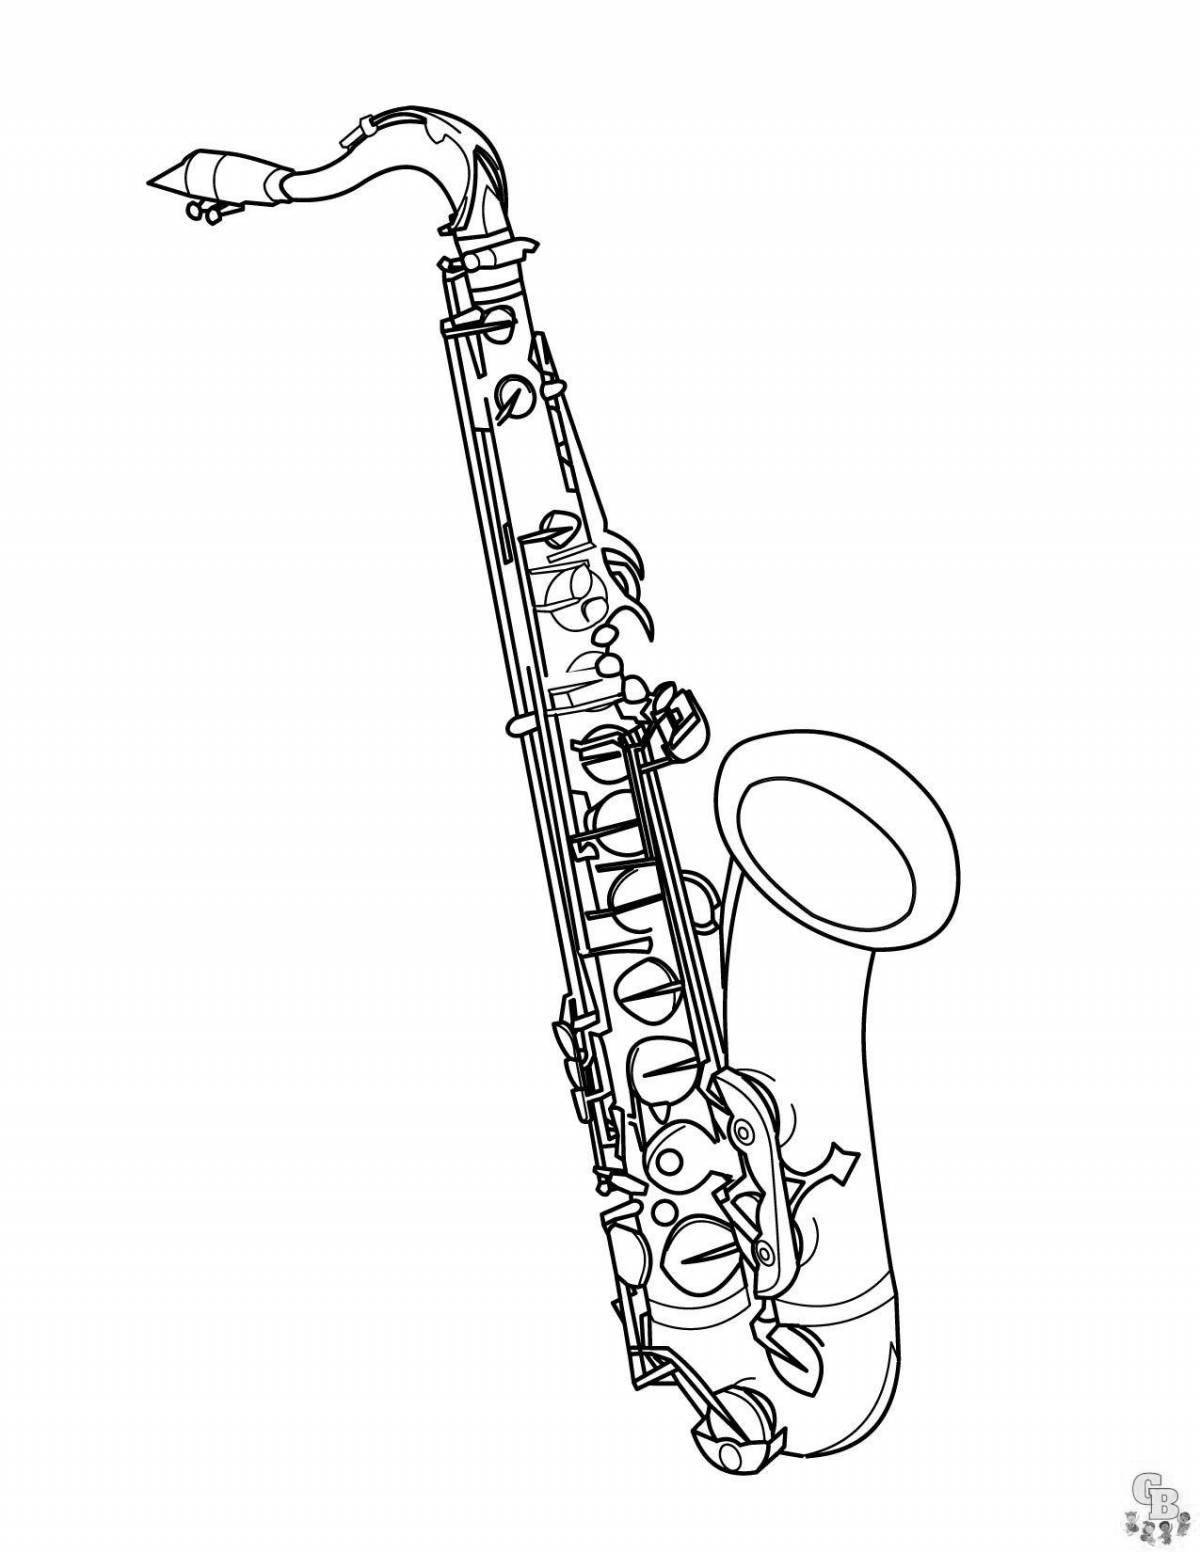 Outstanding flute coloring book for kids